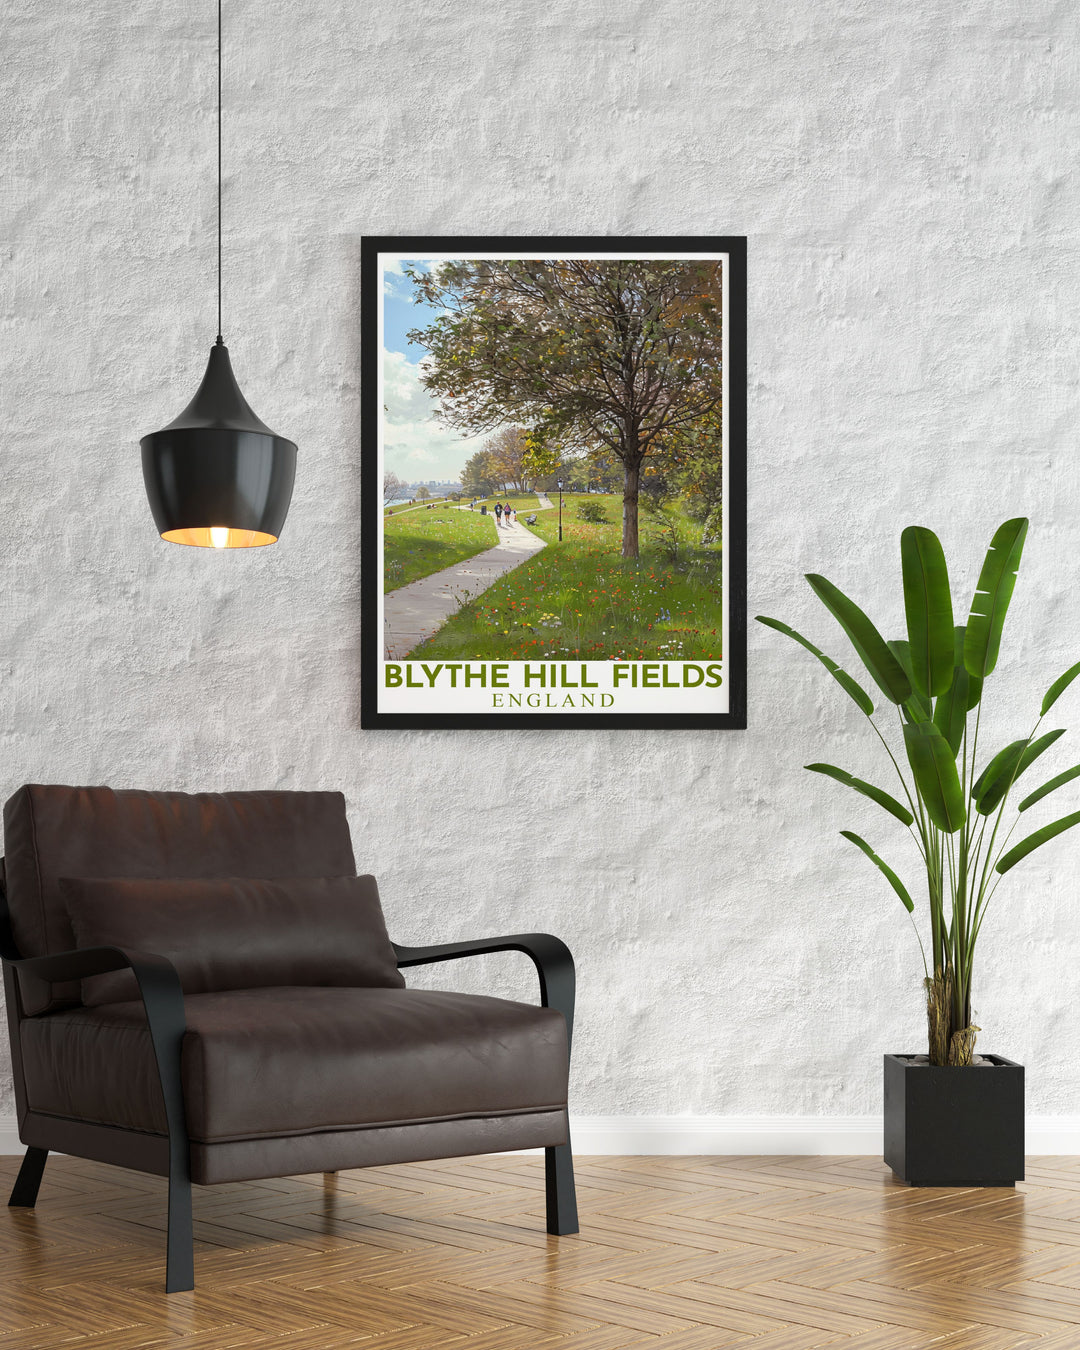 This vibrant travel poster showcases the picturesque walkways and jogging paths of Blythe Hill Fields, perfect for adding a touch of Londons park charm to your walls.